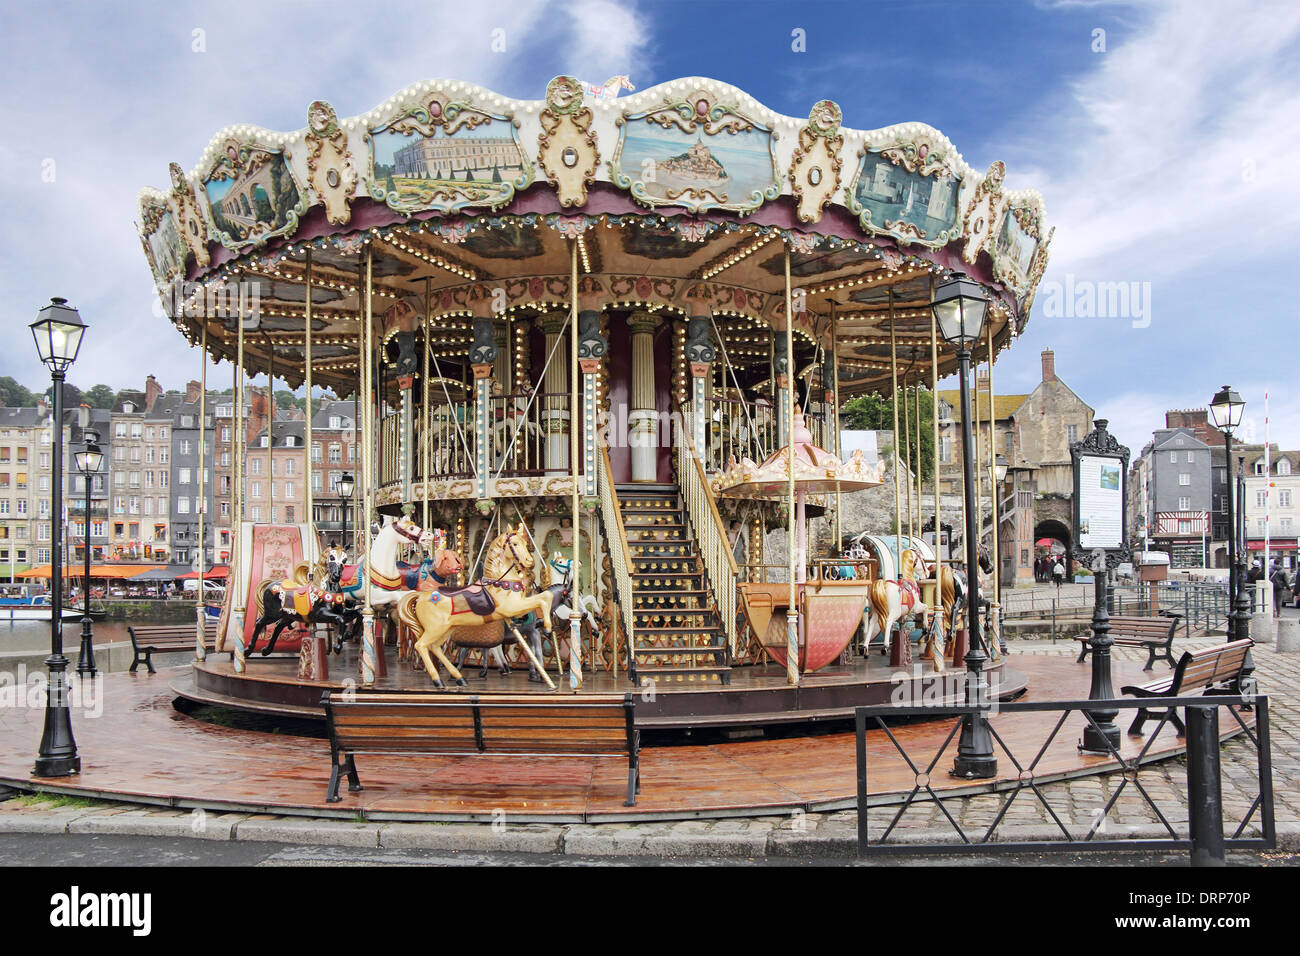 Old wooden carousel in Honfleur, a small medieval harbor in Normandy, France Stock Photo